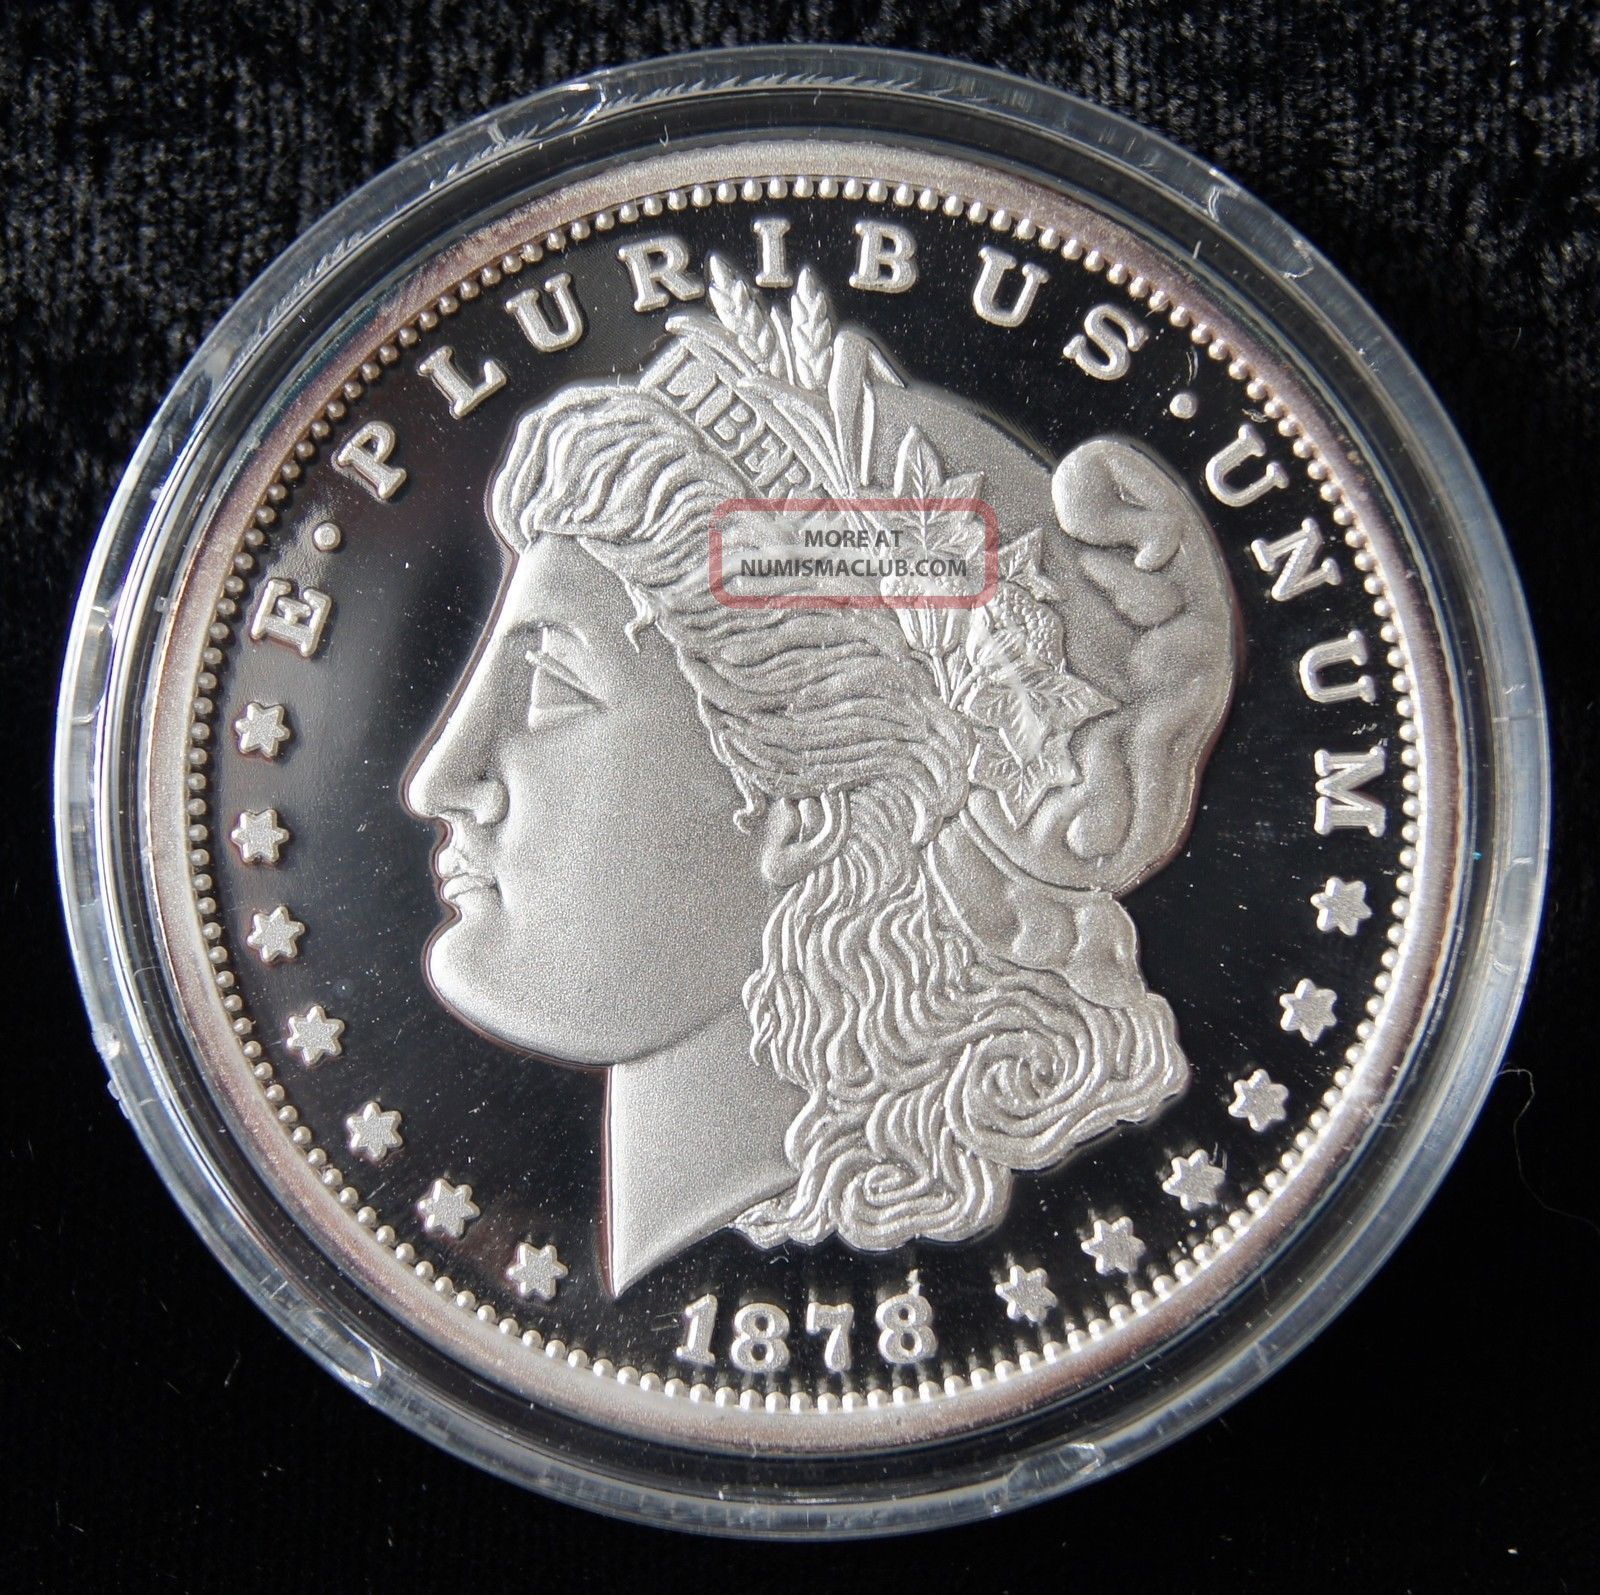 1878 $1 Morgan Dollar 2oz. 999 Pure Silver Proof United States Coin (0516)